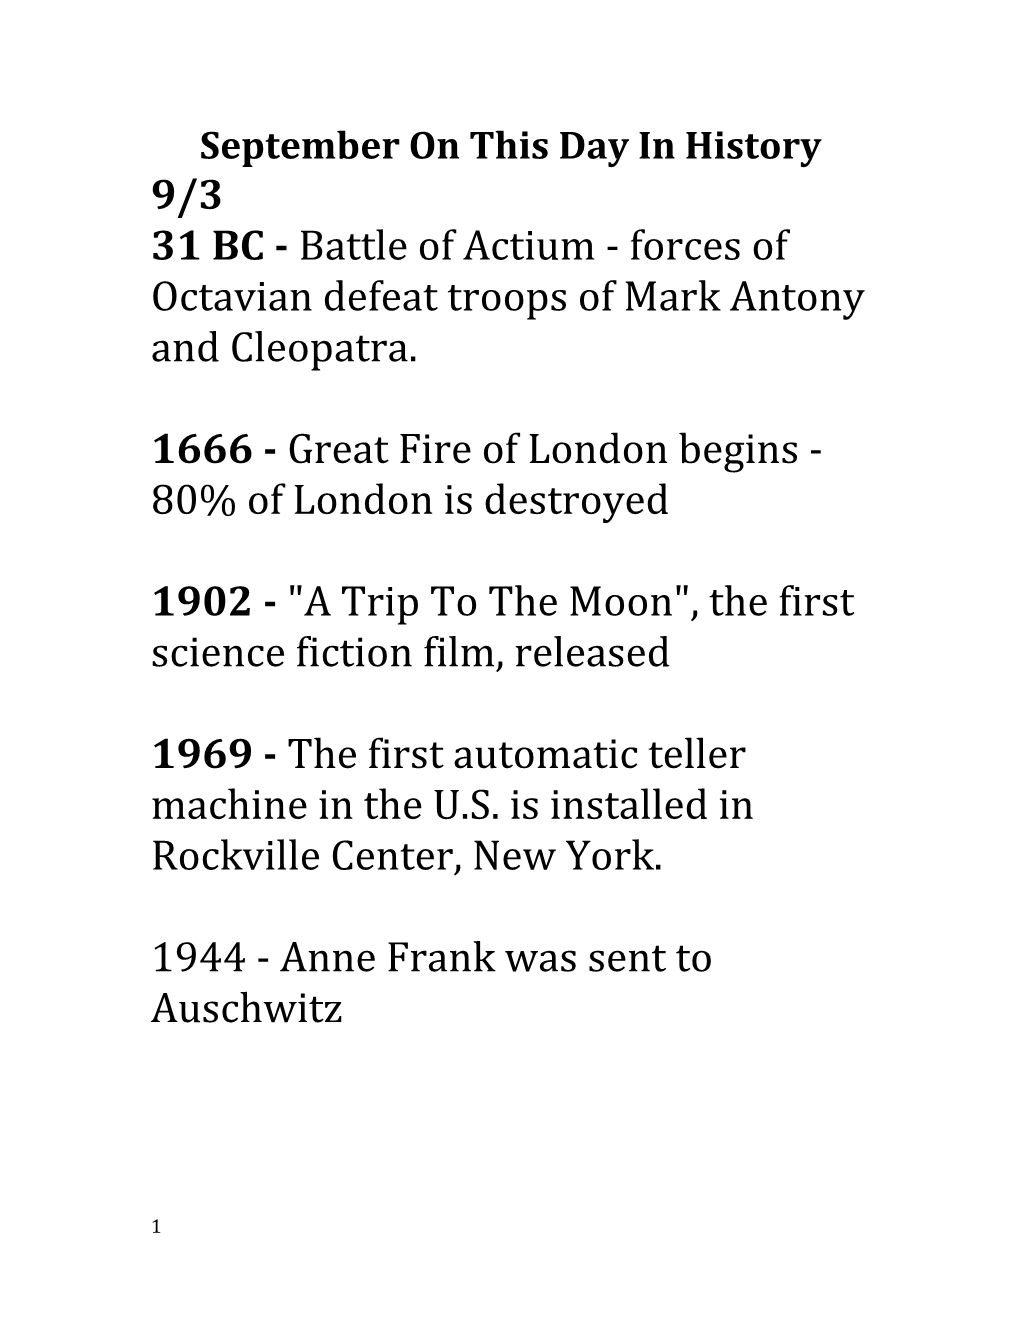 September on This Day in History